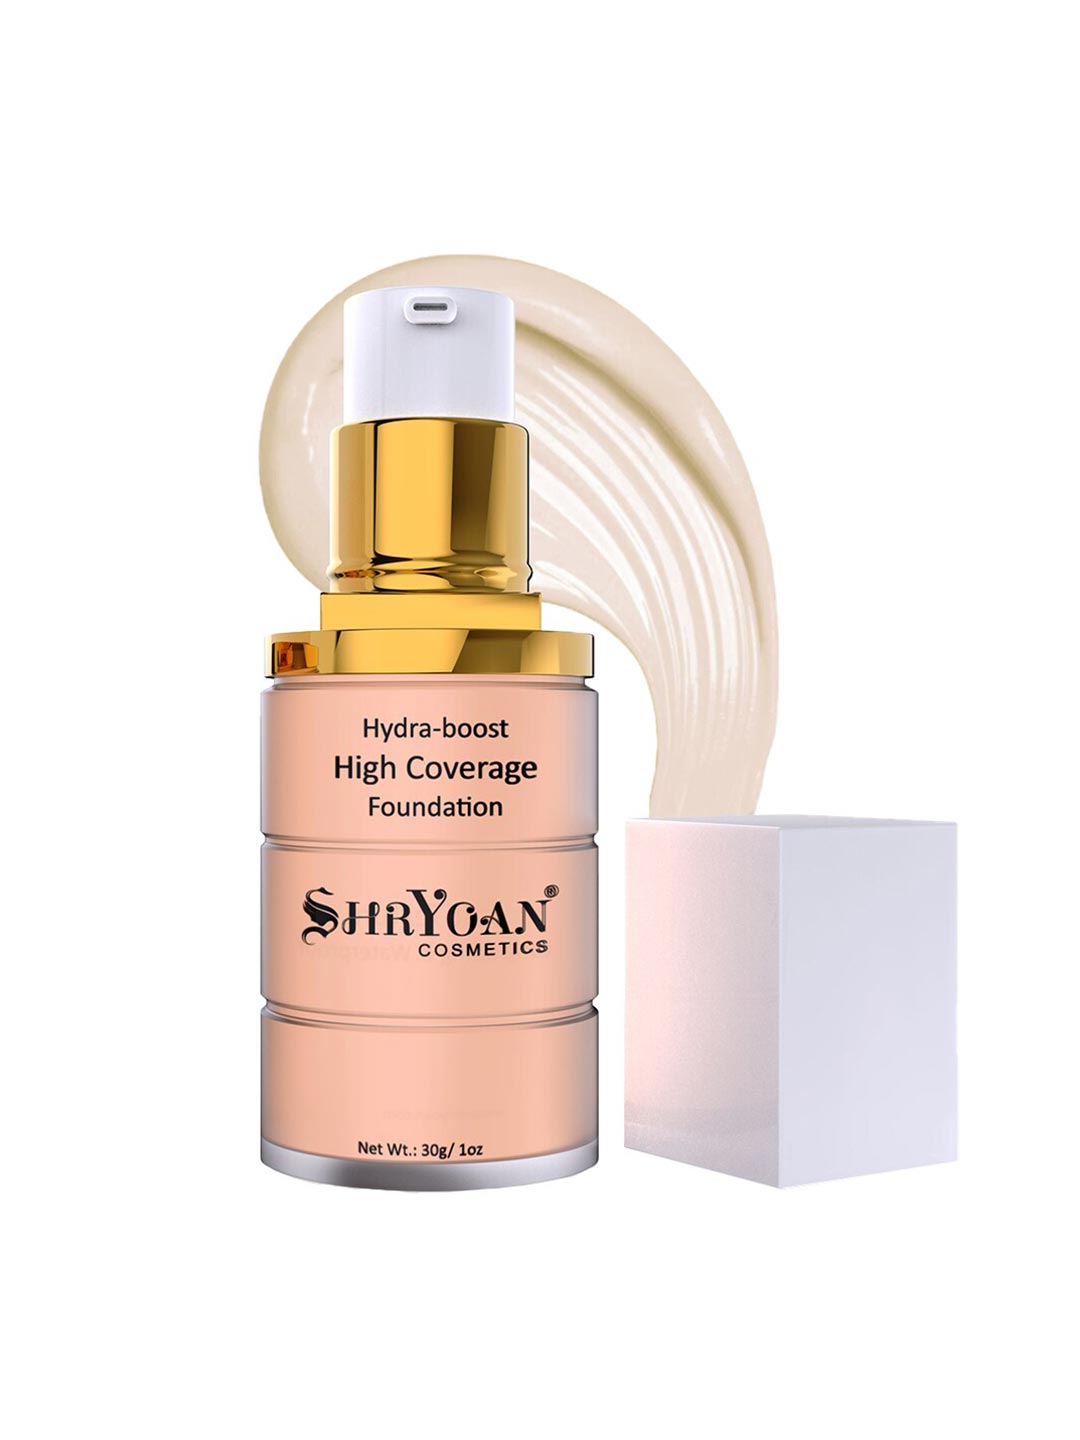 SHRYOAN Beige Colored Hydra-boost High Coverage Foundation Price in India